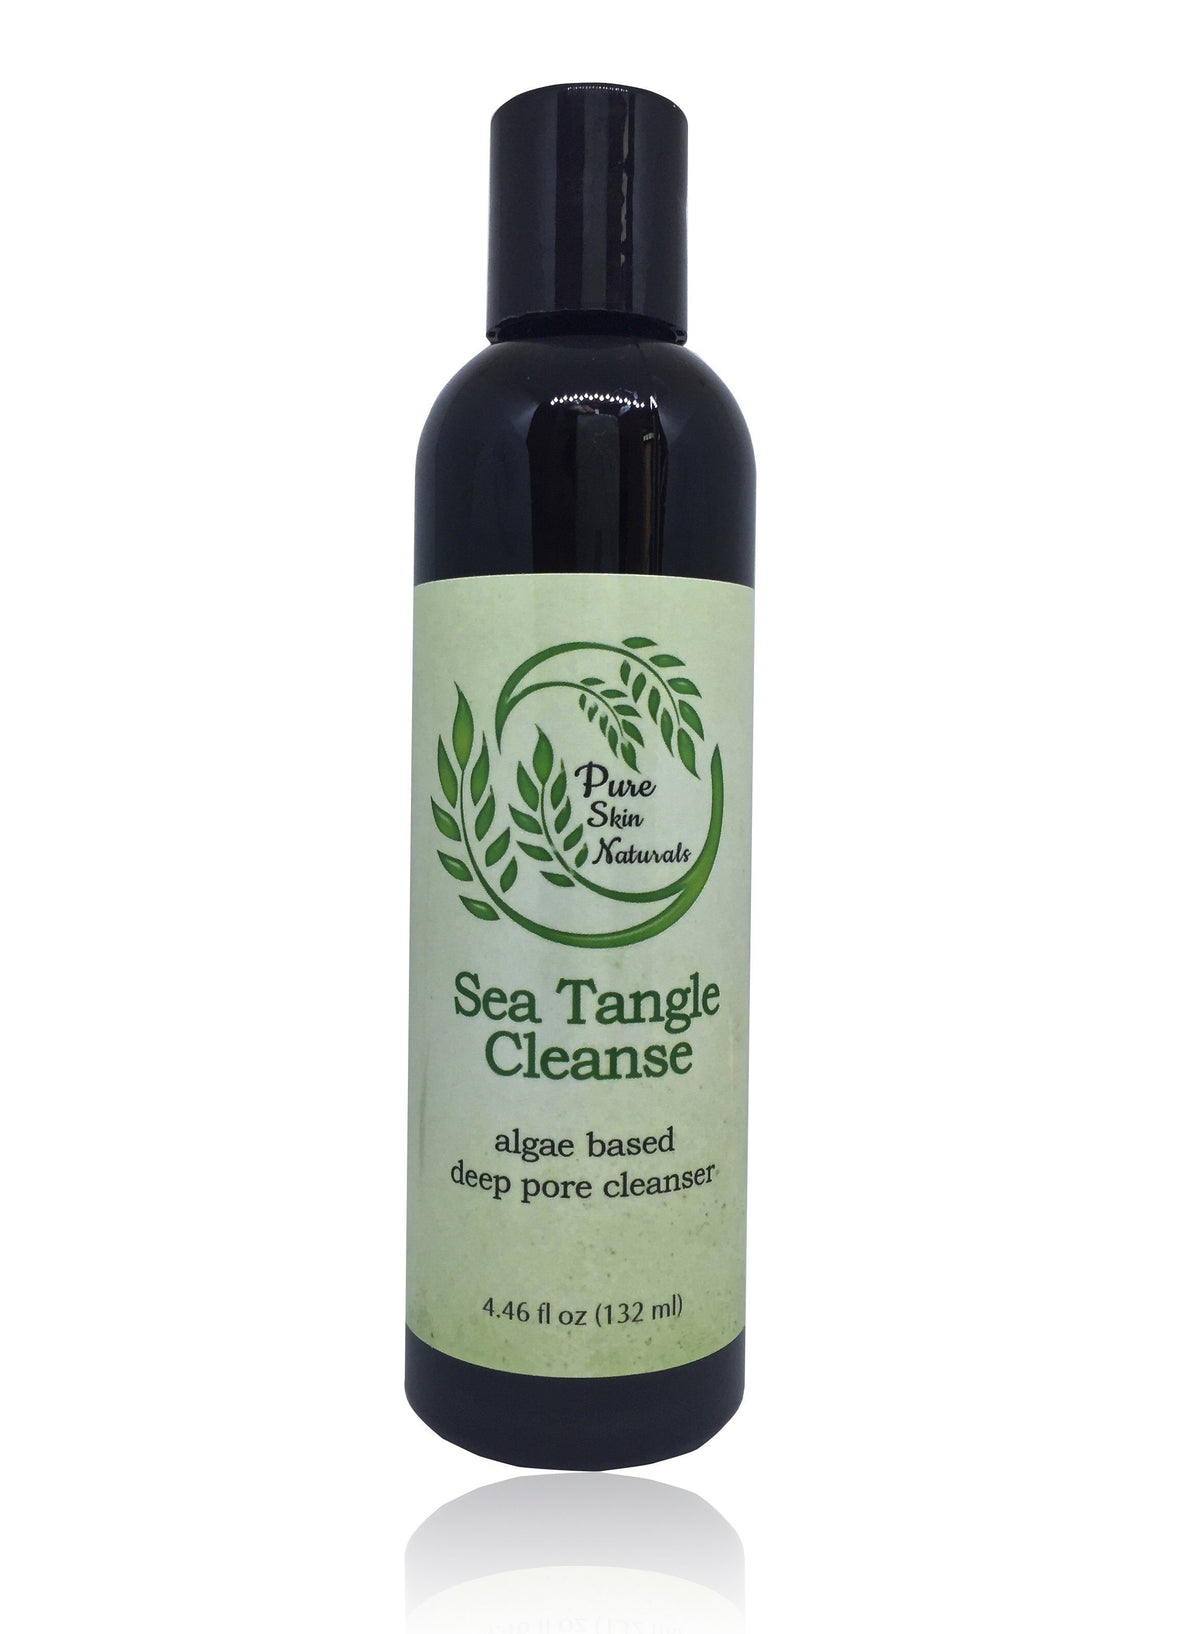 Sea Tangle Cleanse is an algae based deep pore cleanser for all skin types